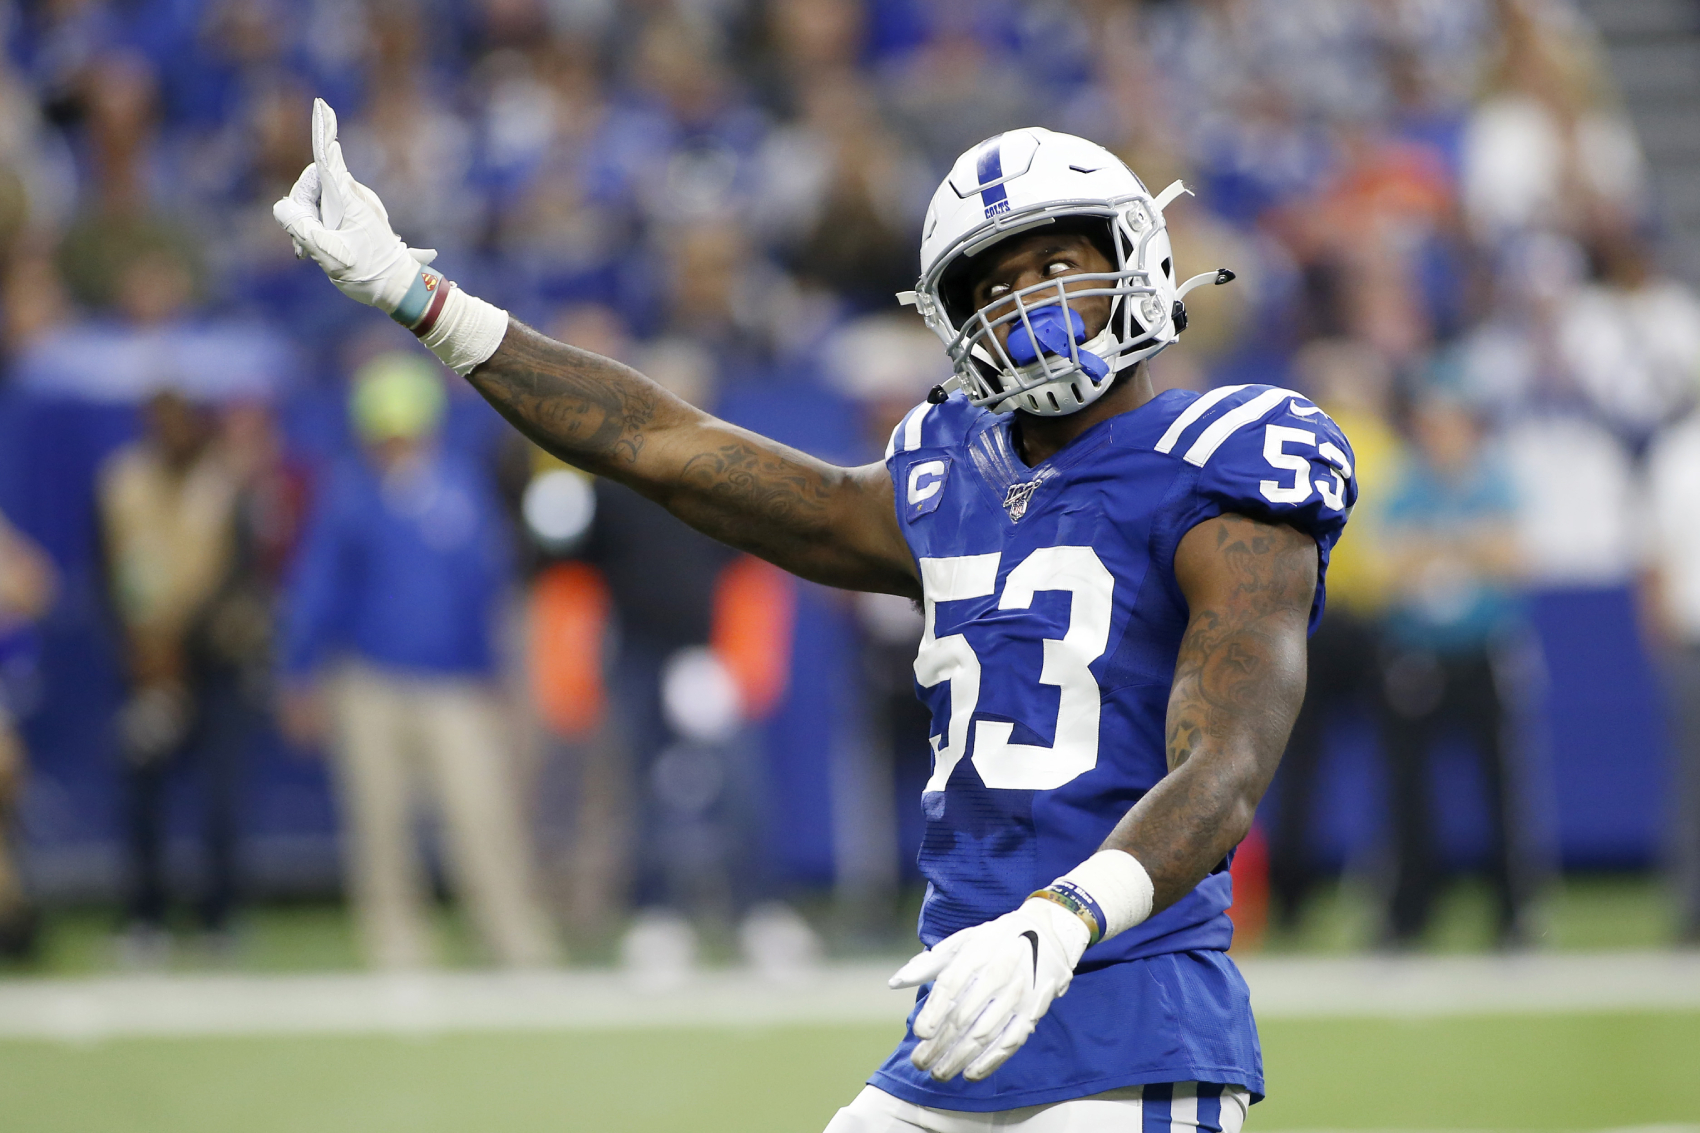 Darius Leonard is one of the best linebackers in the NFL for the Colts. However, the NFL has recently made him take multiple drug tests.